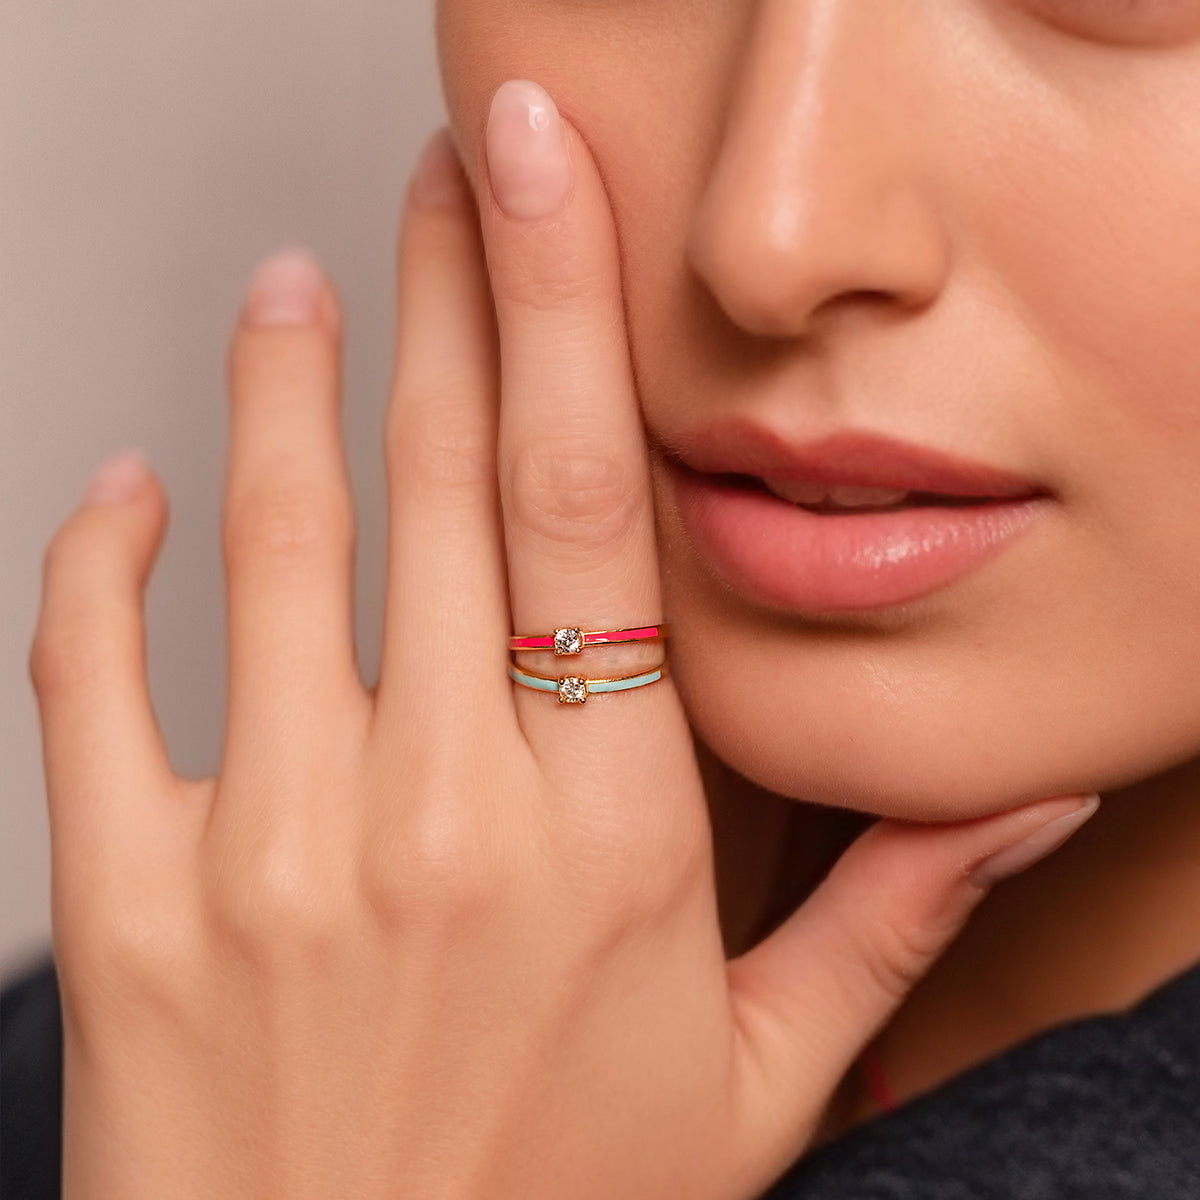 Rings - Enamel and lab-grown diamond ring - ORO18KT - 4 | Rue des Mille